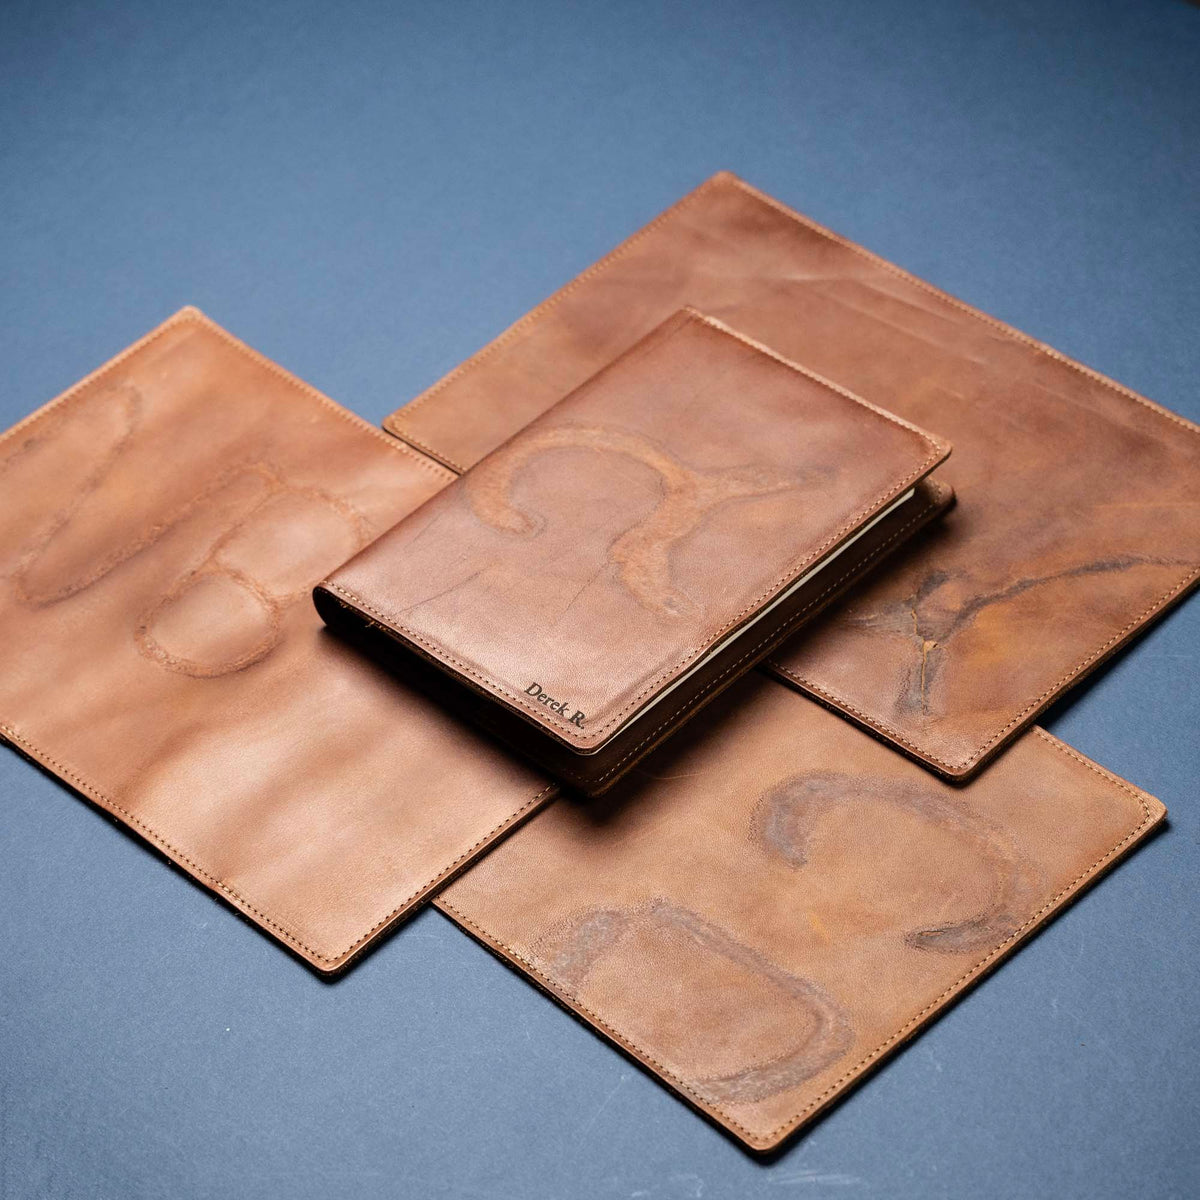 Branded Cowhide - A5 Leather Journal - Personalized High Character (One-Of-A-Kind) Notebooks - 192 pages 8.75” x 6.25”